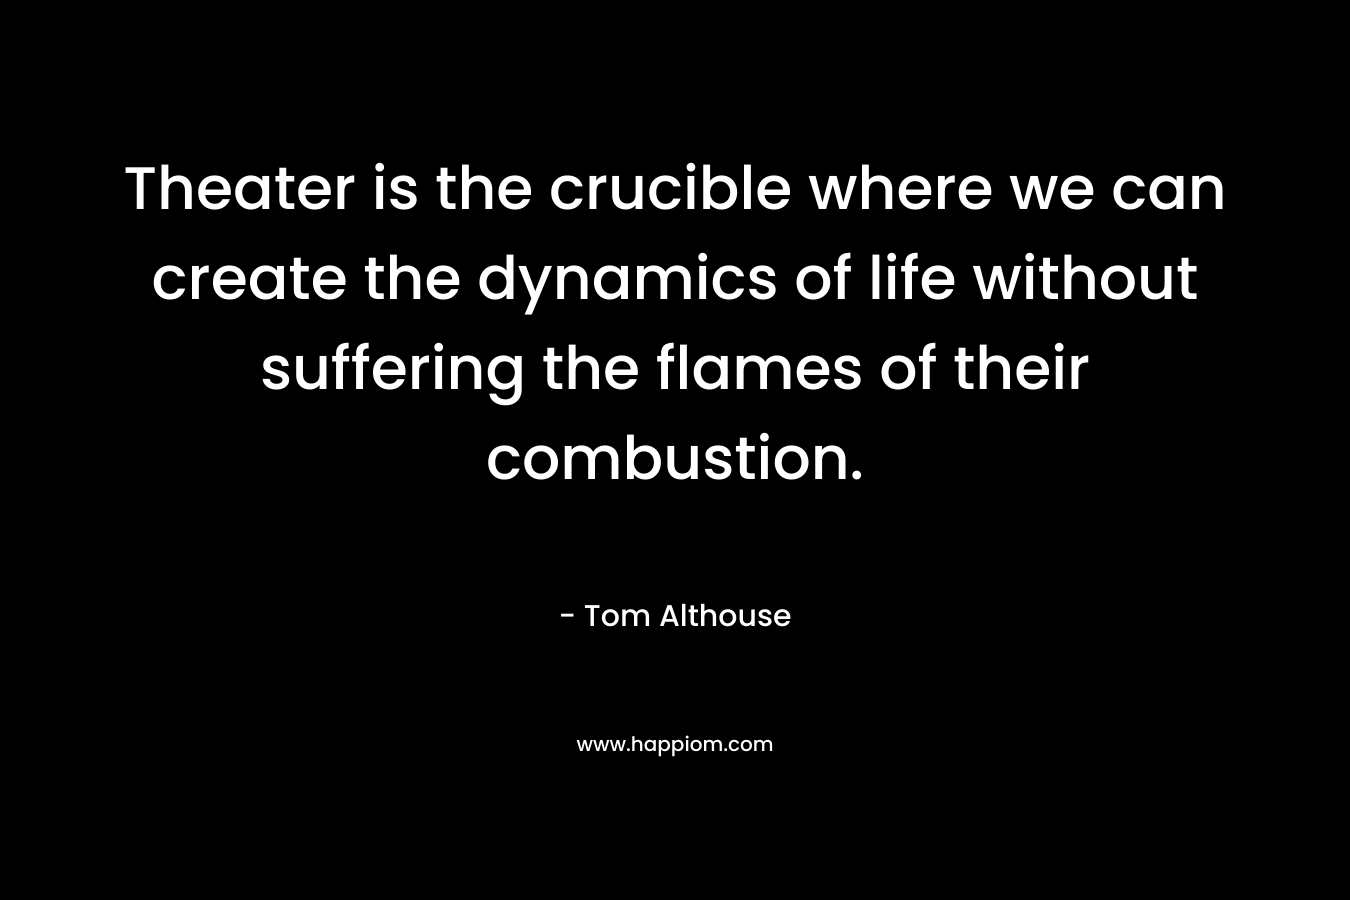 Theater is the crucible where we can create the dynamics of life without suffering the flames of their combustion. – Tom Althouse